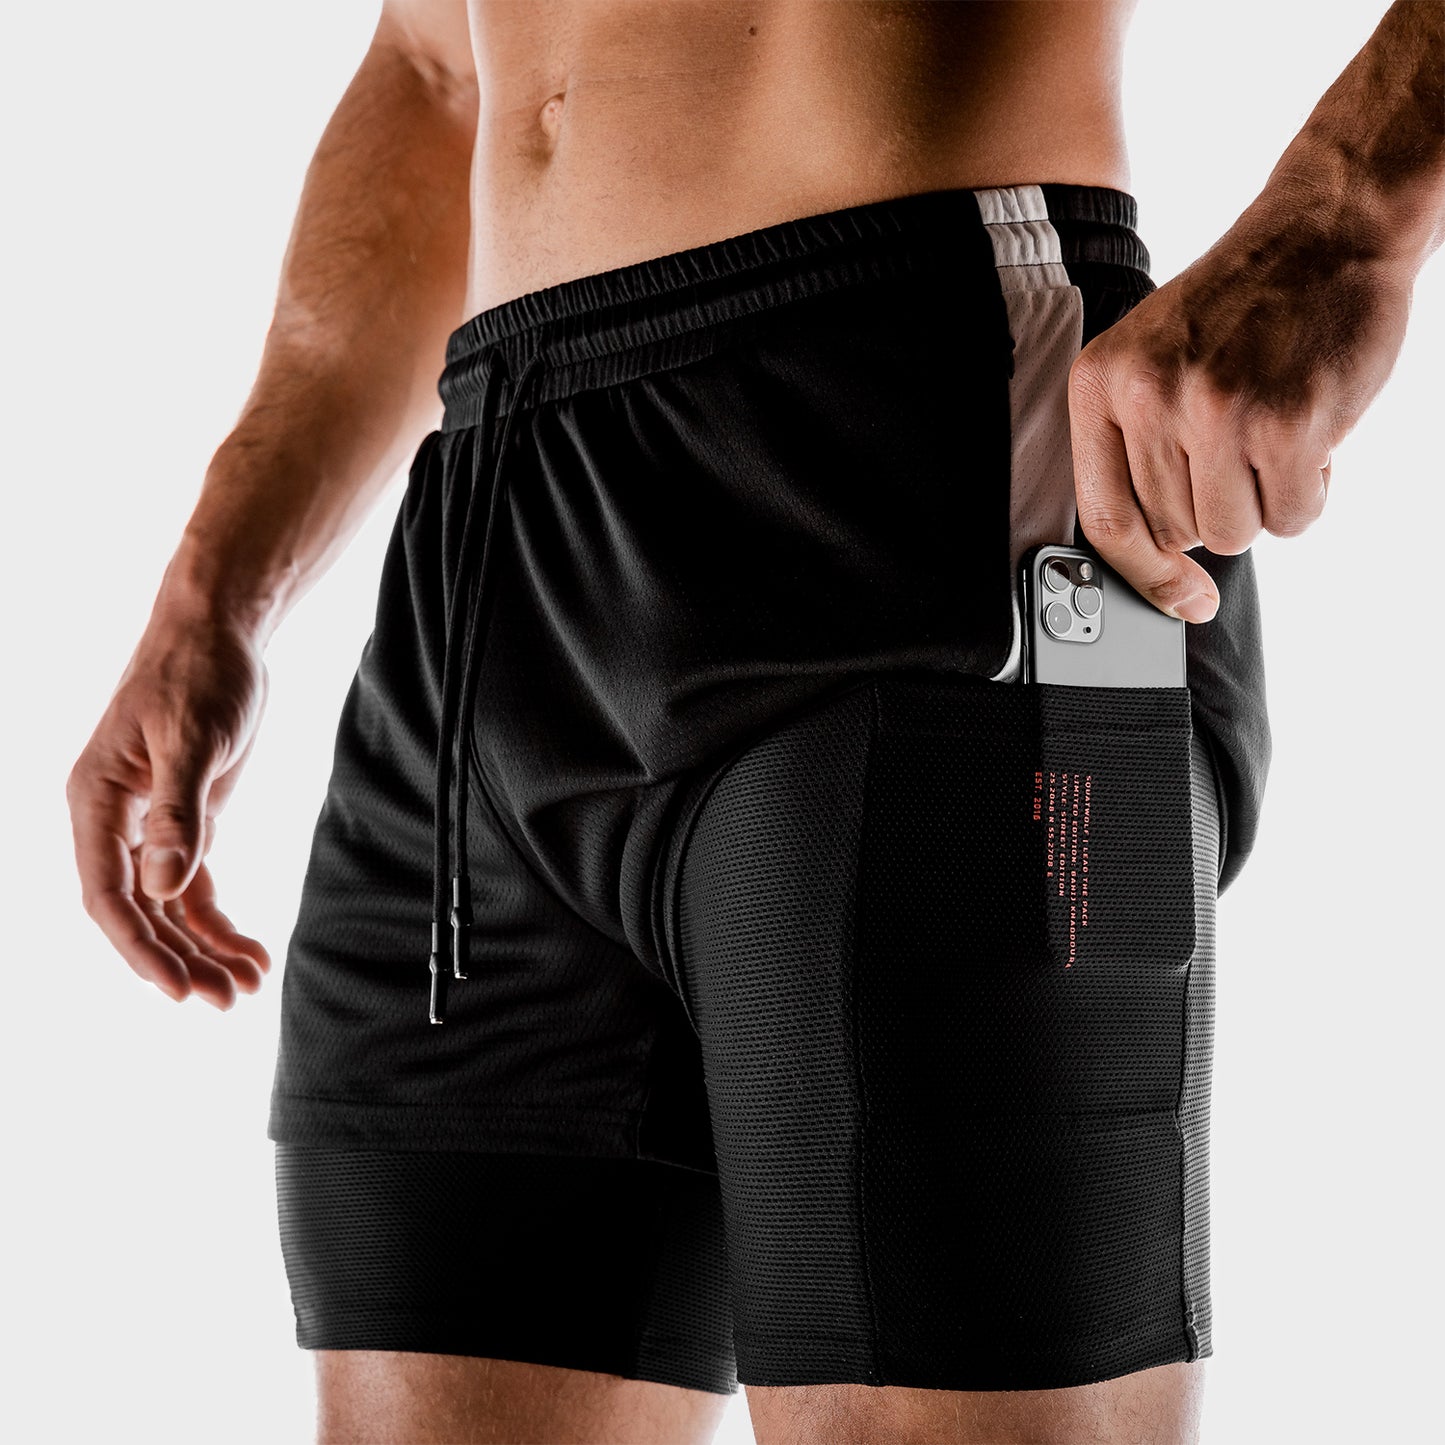 squatwolf-gym-wear-hybrid-performance-2-in-1-shorts-black-workout-shorts-for-men